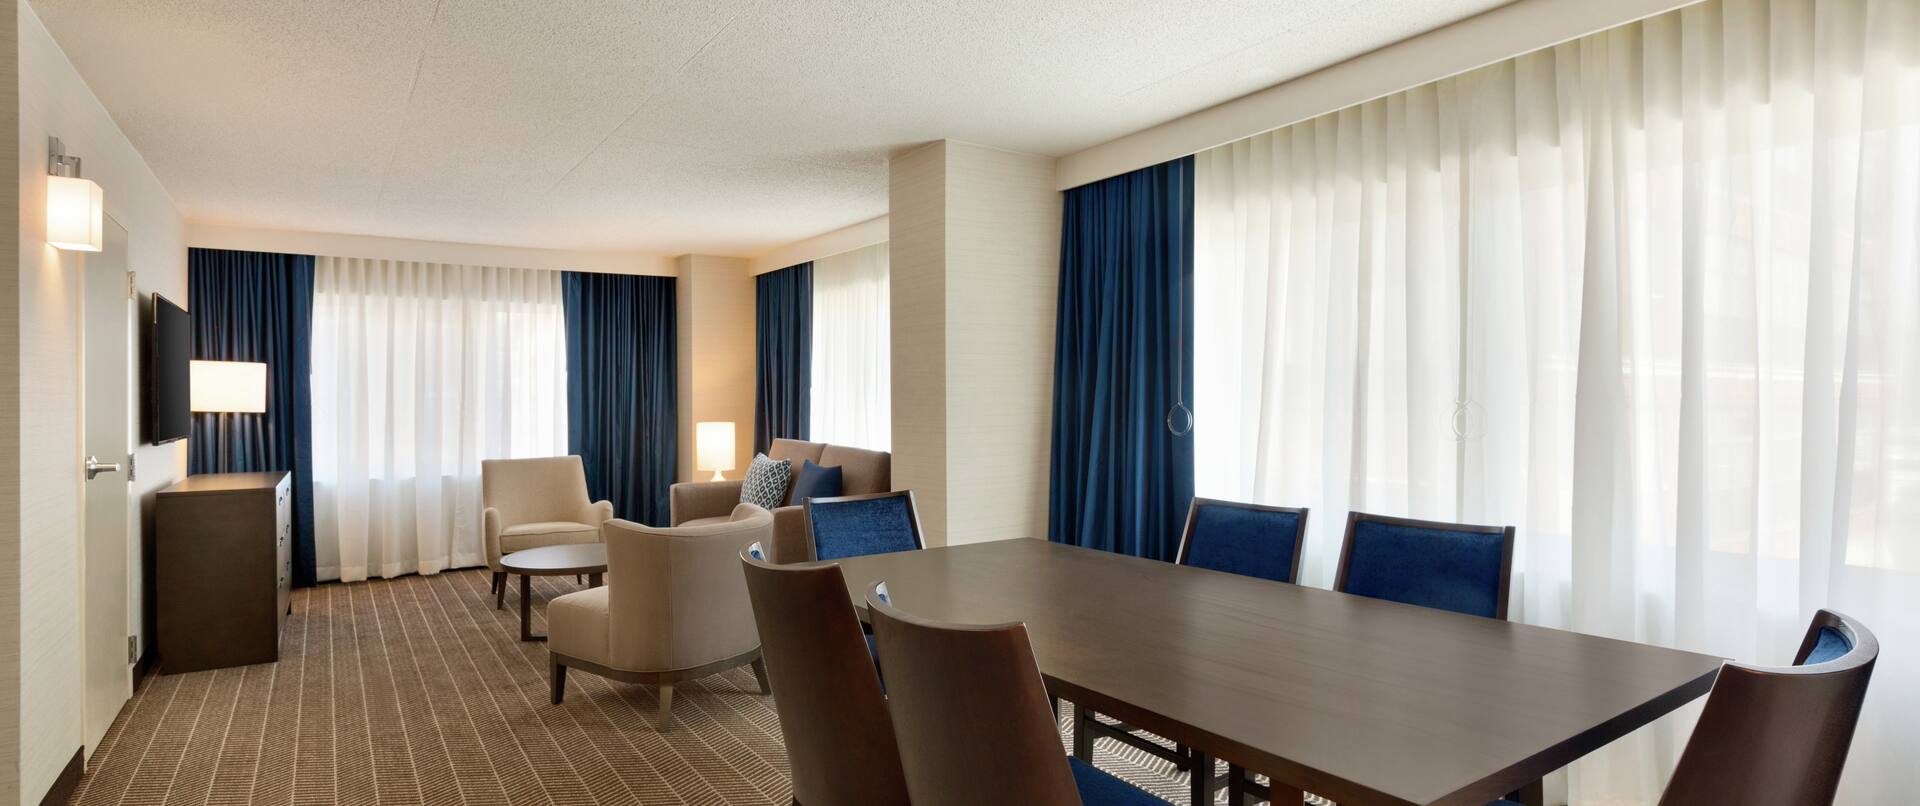 Executive Suite Living Area with Meeting Table and Chairs